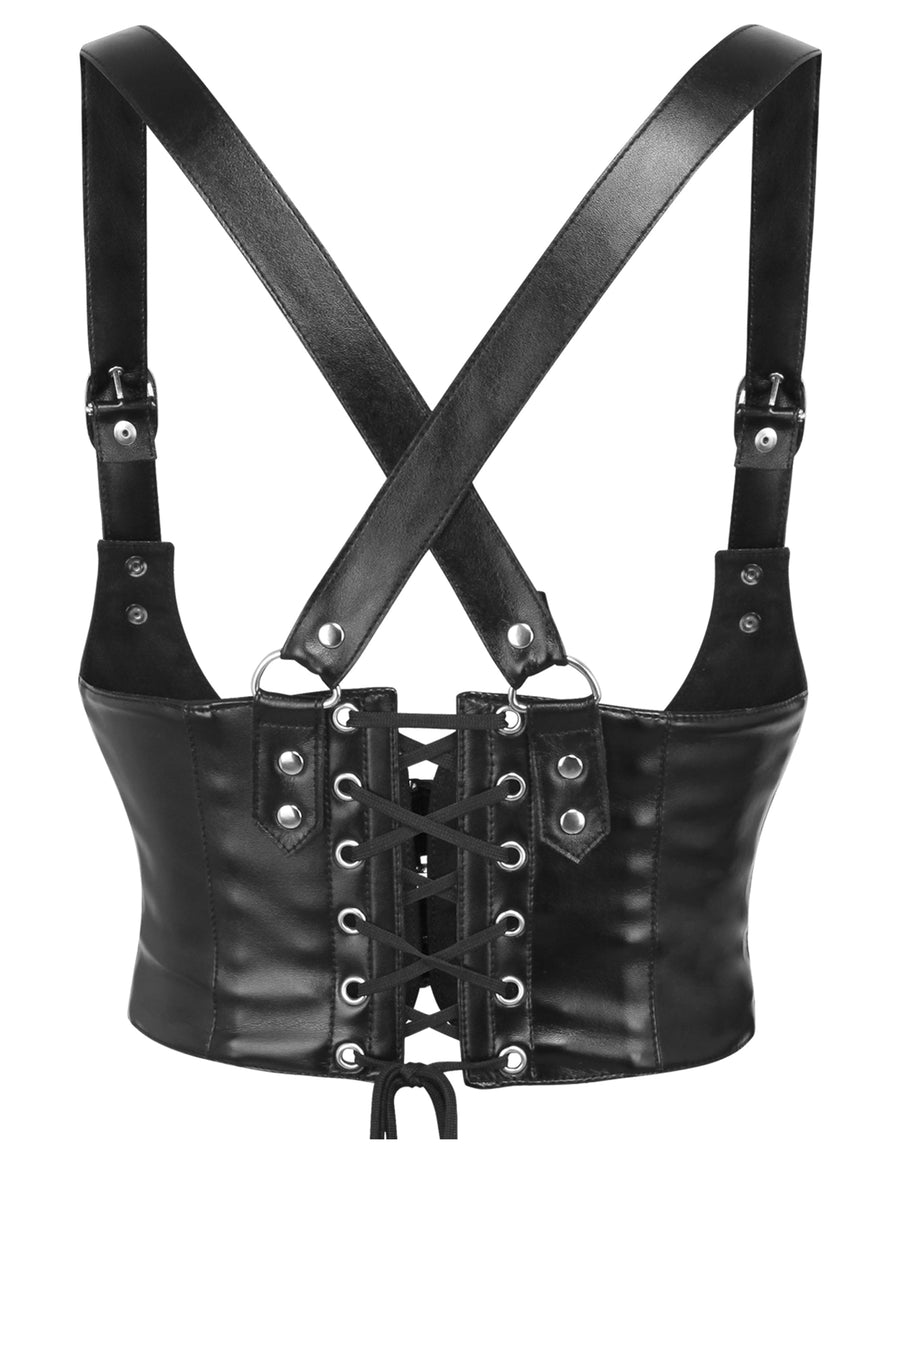 Gothic Black Faux Leather Corset Inspired Belt